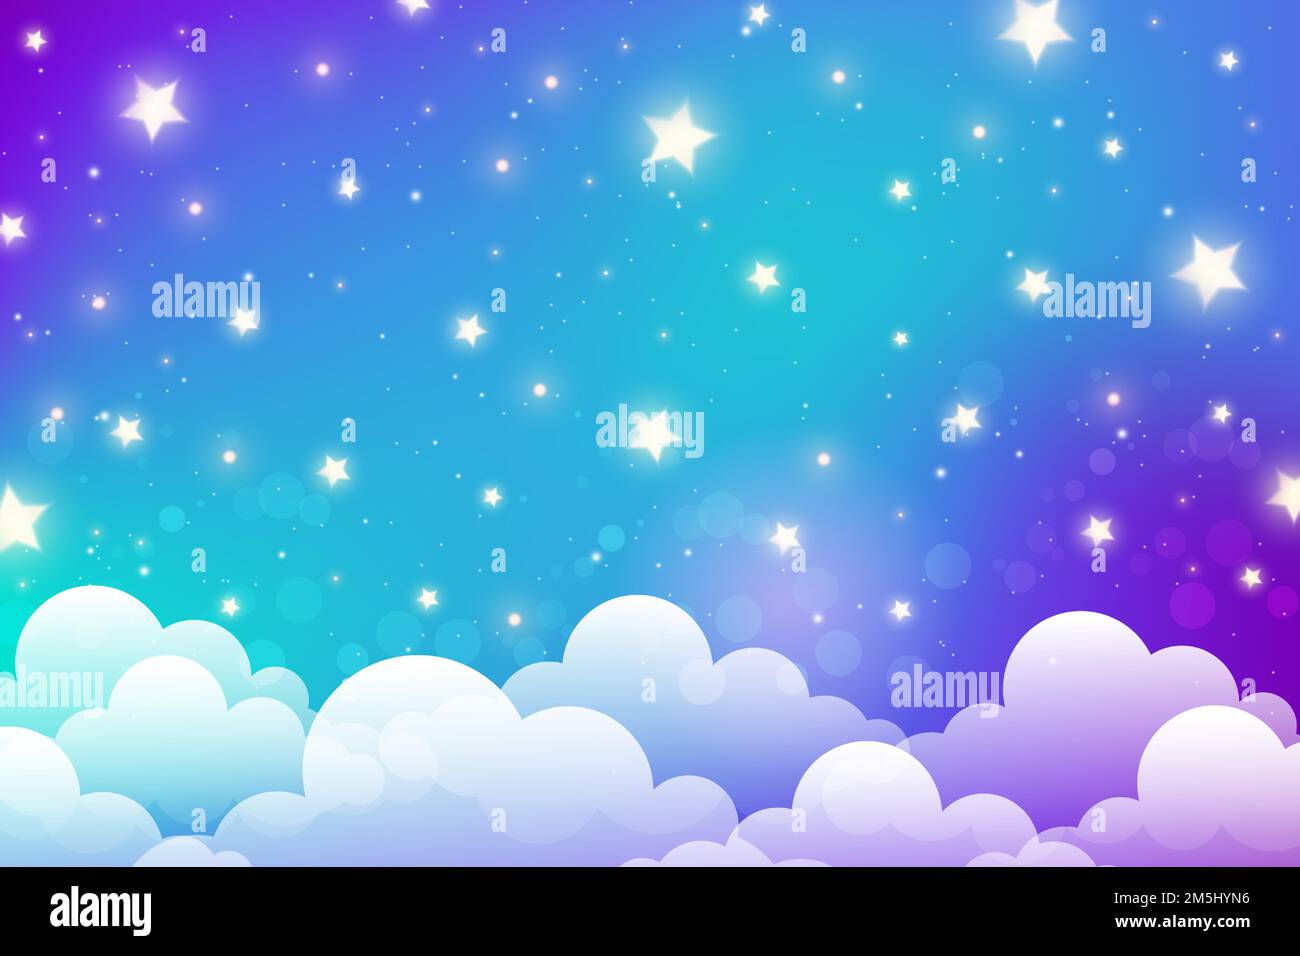 Night sky with stars and clouds. Magical landscape, abstract fabulous pattern. Cute candy wallpaper. Vector cartoon illustration. Stock Vector